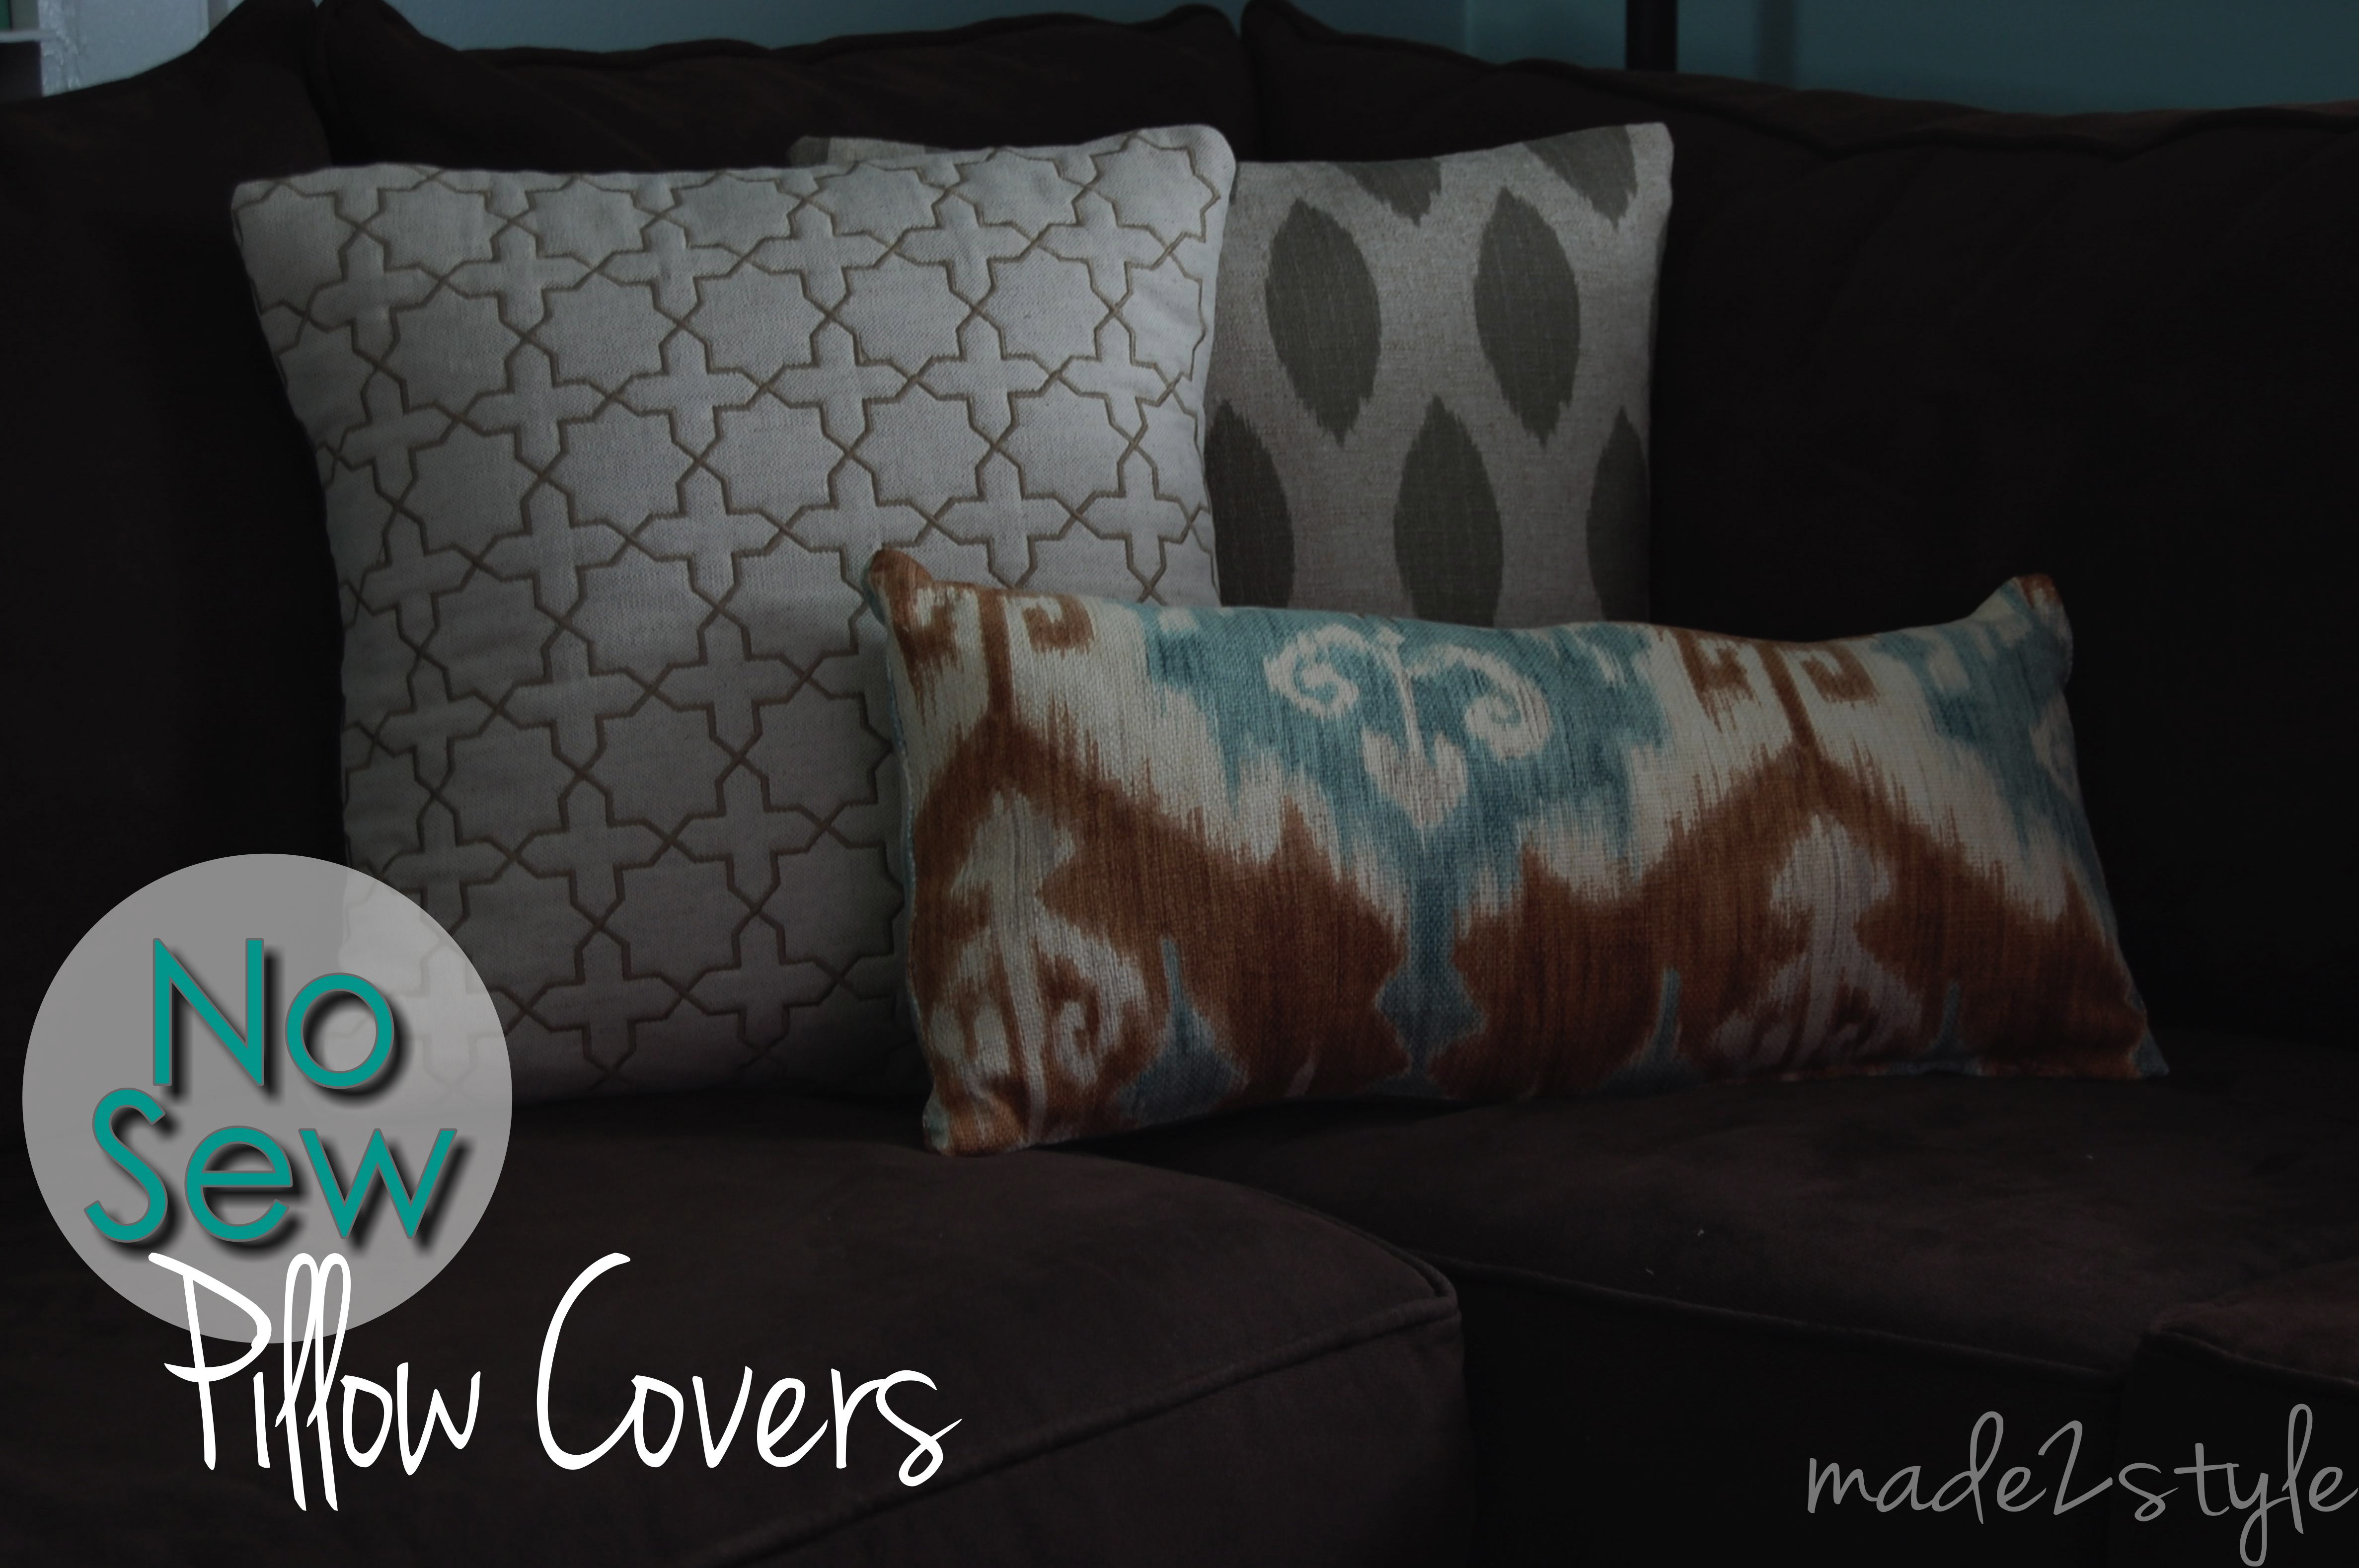 No Sew Pillow Covers